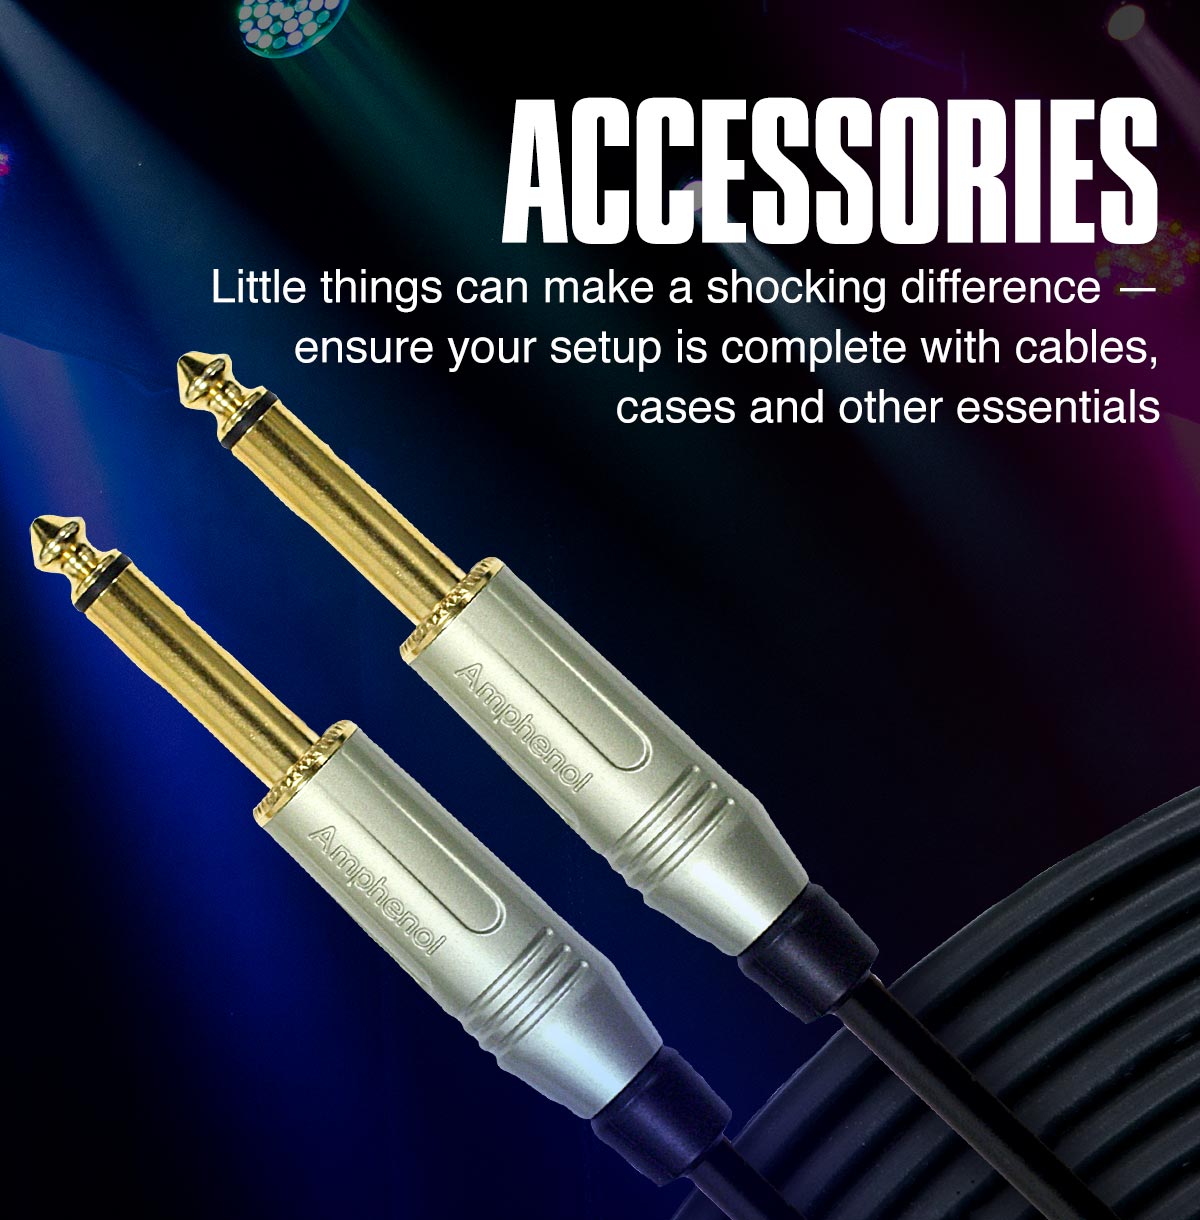 Accessories. Little things can make a shocking difference - ensure your setup is complete with cables, cases and other essentials.